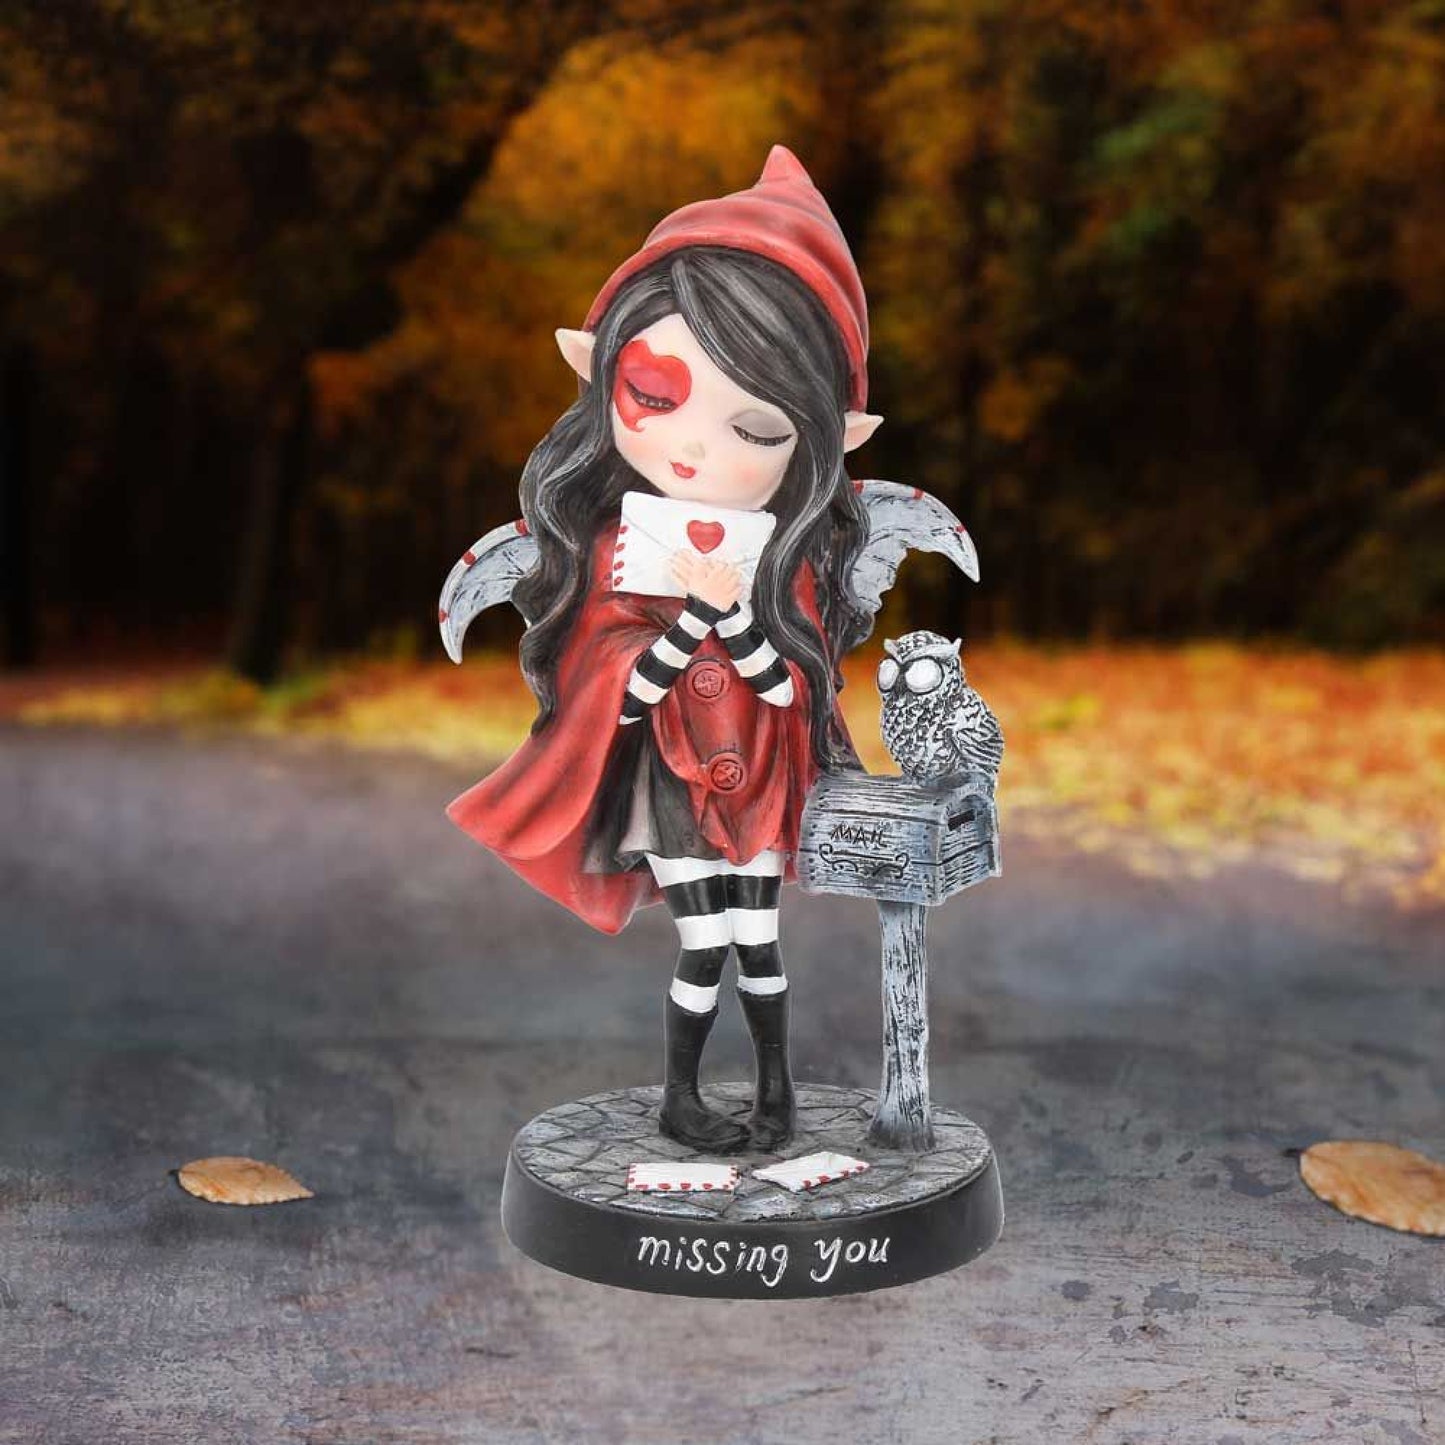 Wearing a red, hooded cloak this unique Fairy has a pair of delicate white wings emerging from her back.  Her raven hair frames her face which is decorated by a large heart.  In her hands, she holds a love letter close while her owl companion sits calmly on a wooden letter box.  The theme behind the figurine is emblazoned on the black base, ‘Missing You’. 17.5cm high